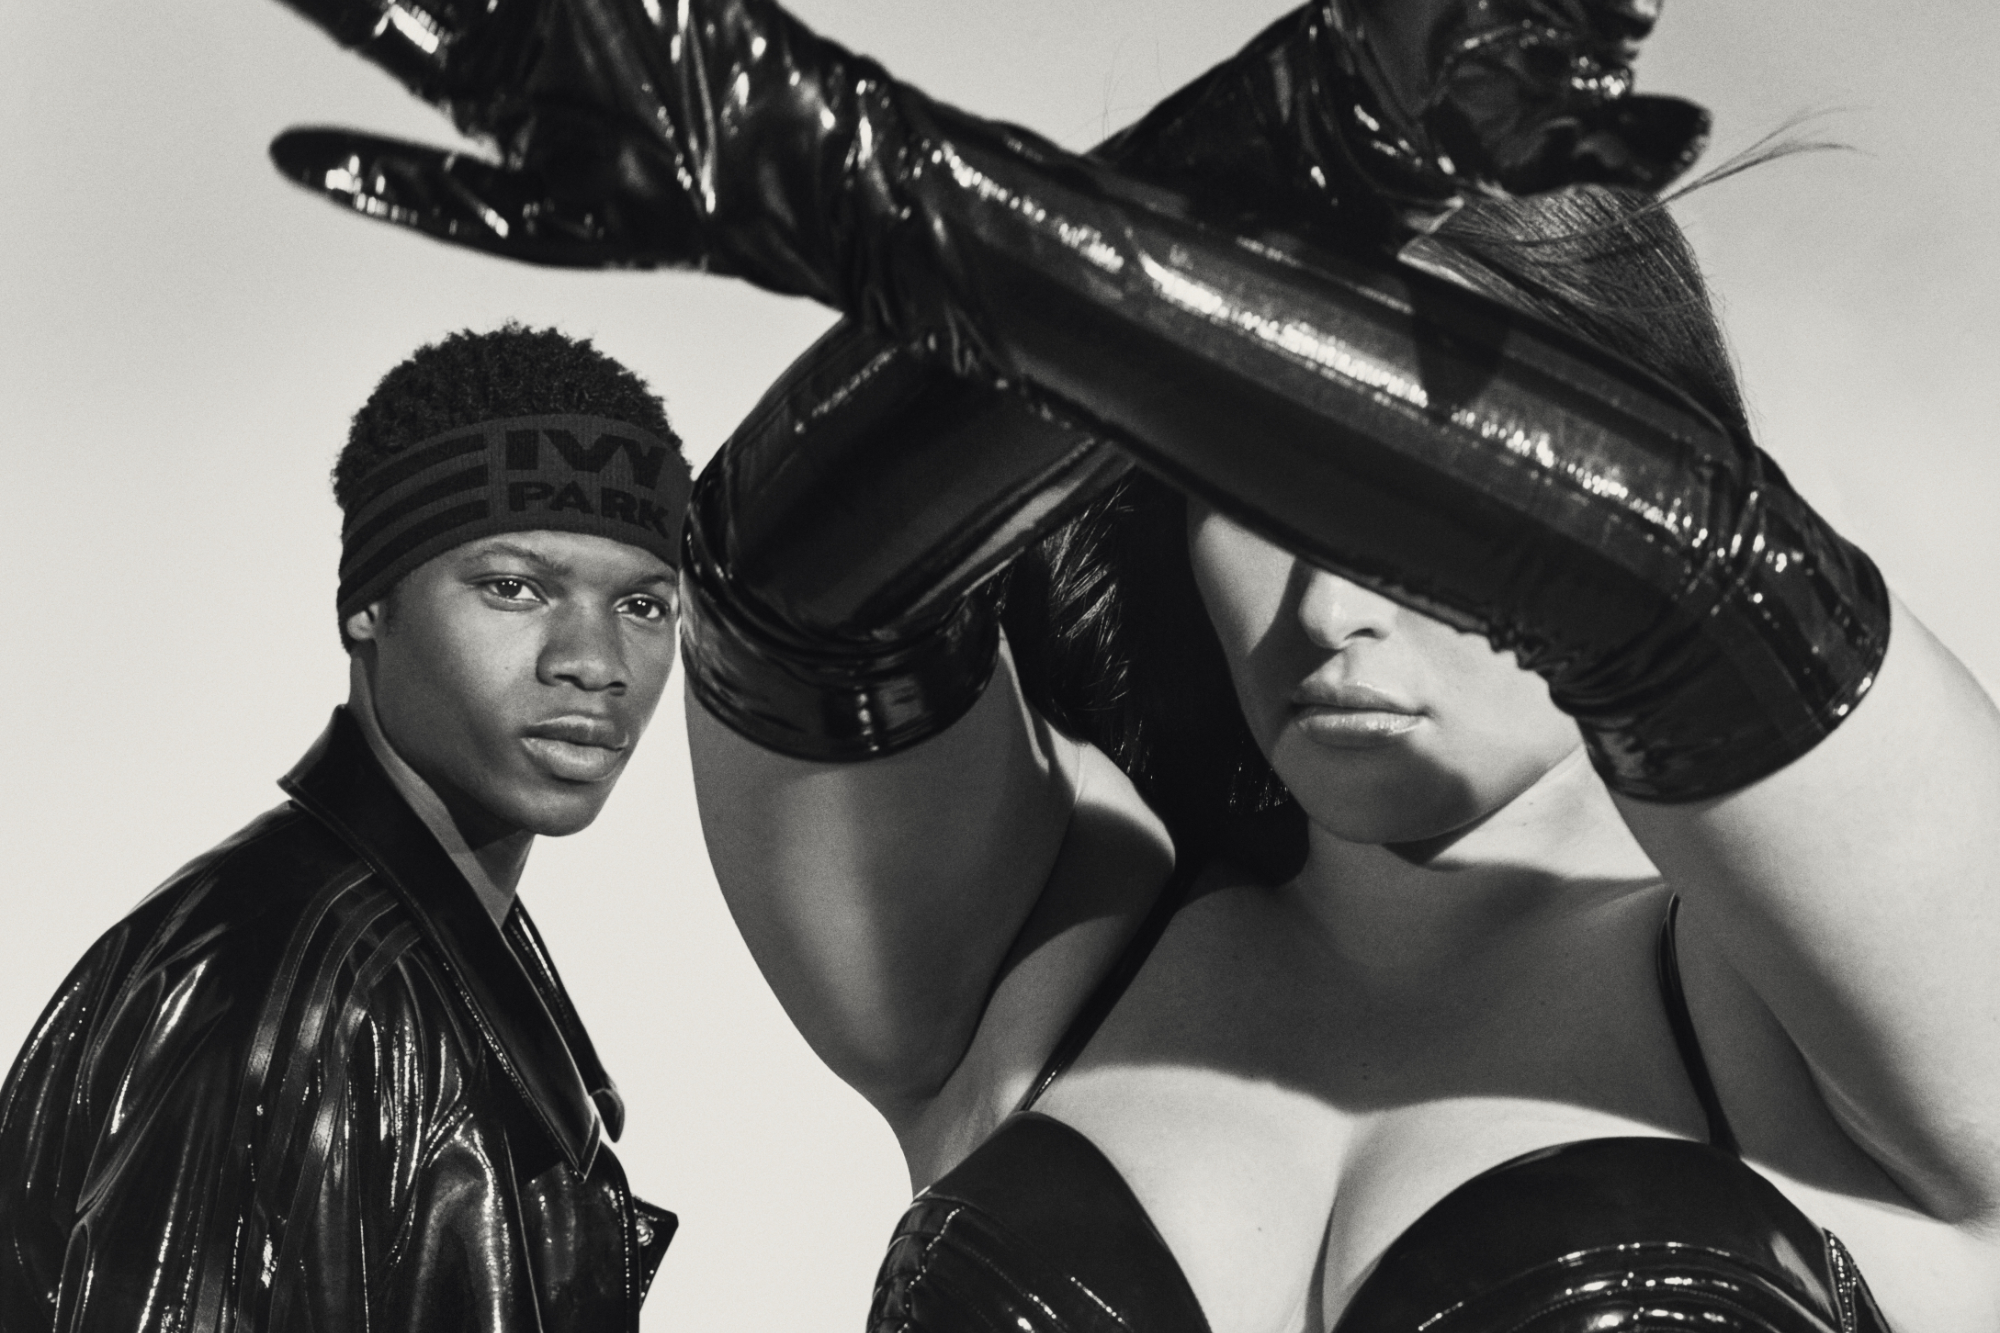 IVY PARK & adidas' Black NOIR Collection Saves the Best for Last